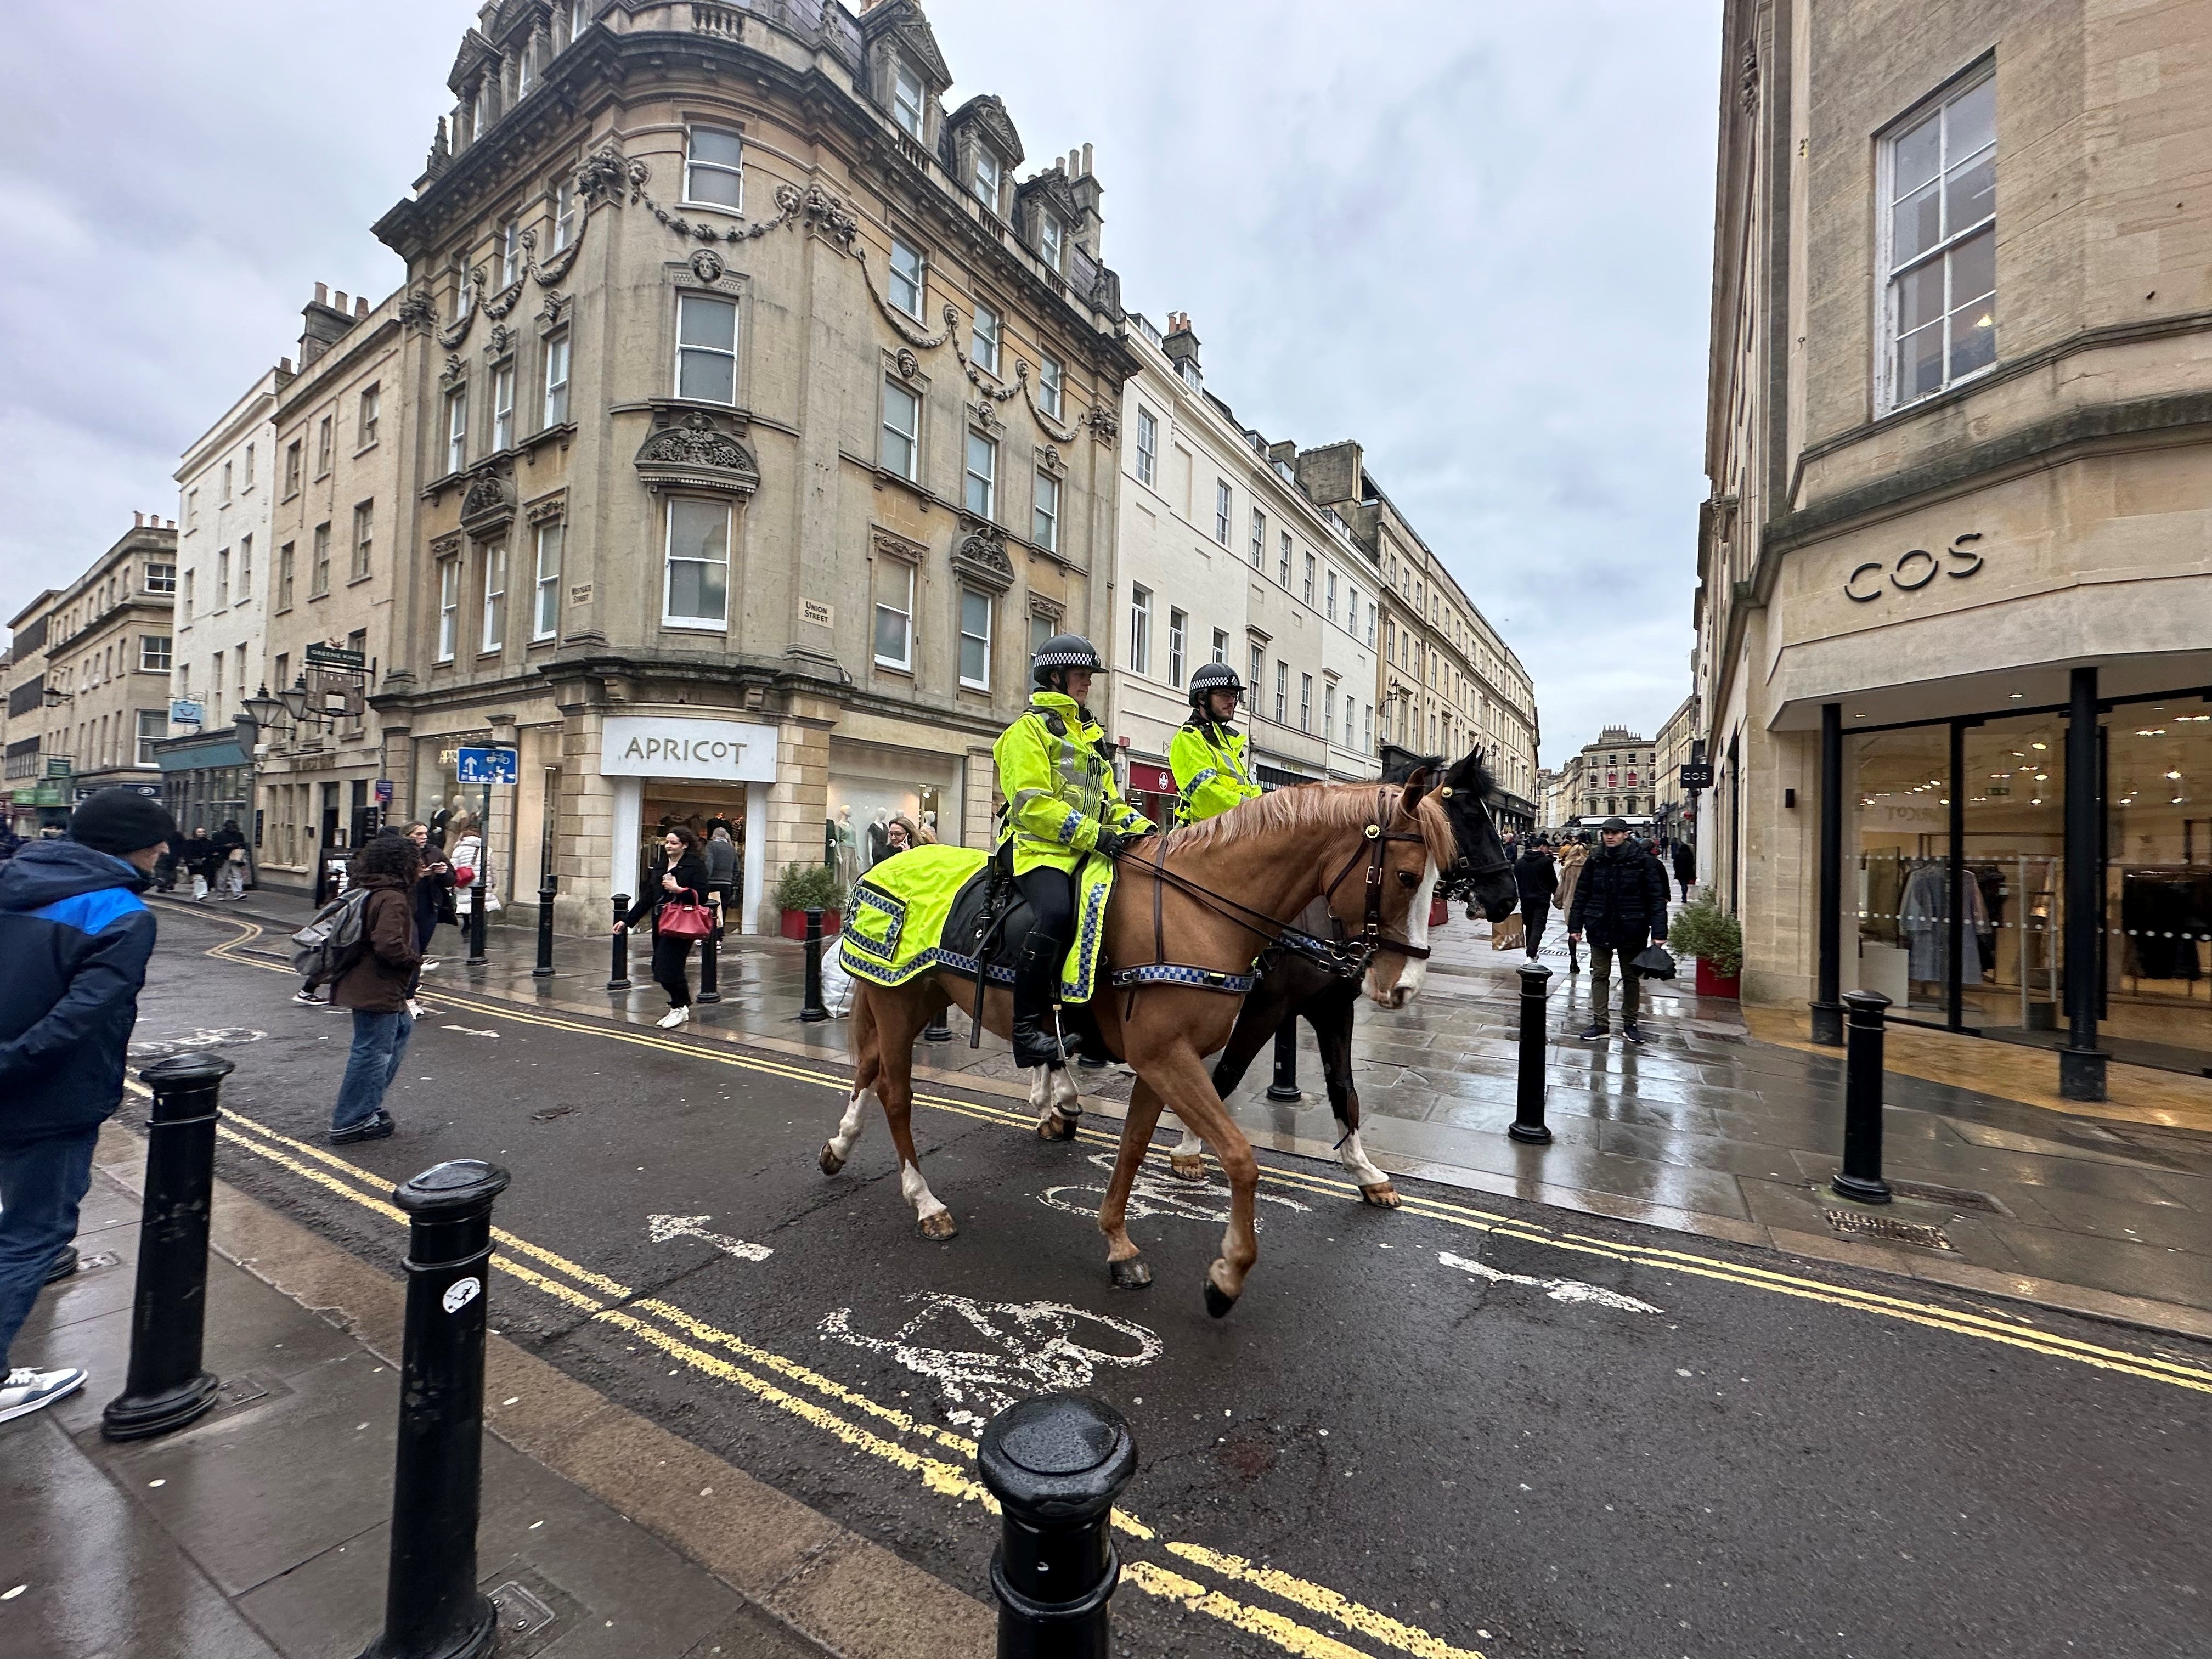 Two mounted police officers patrol Bath city centre as part of an initiative since a stabbing in a city centre park in January